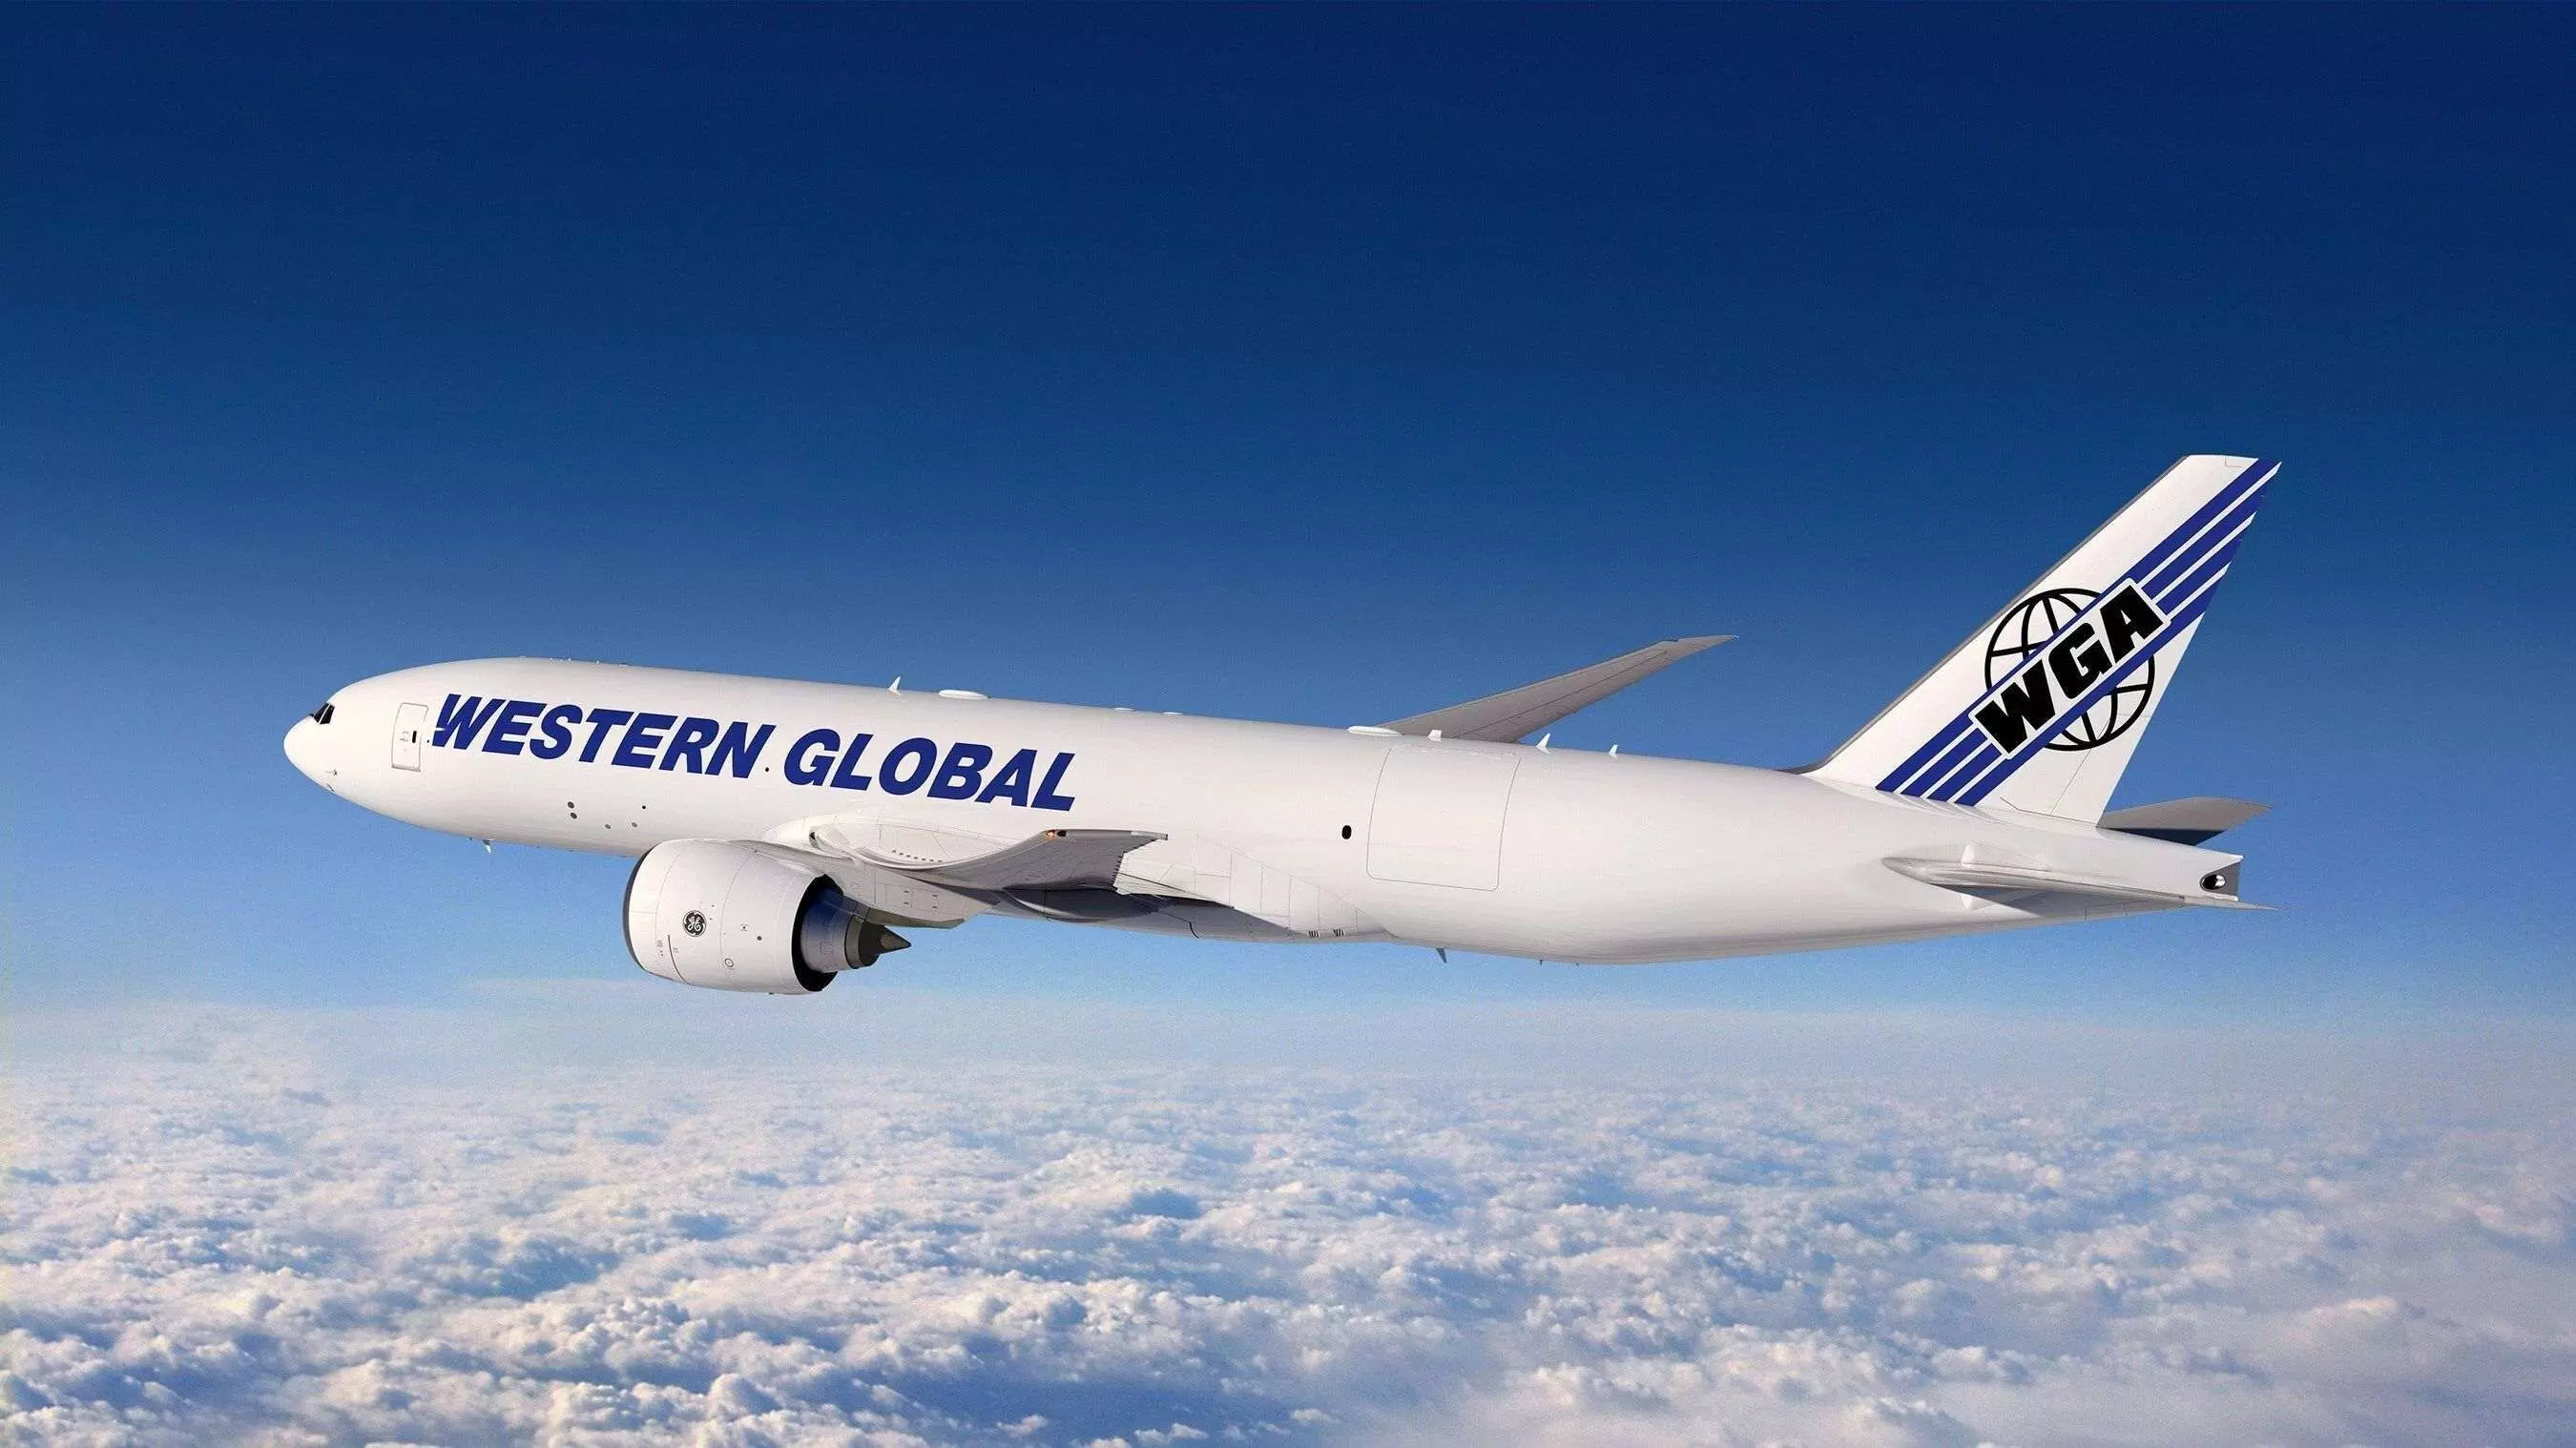 Western Global Airlines purchases 2 Boeing 777 Freighters